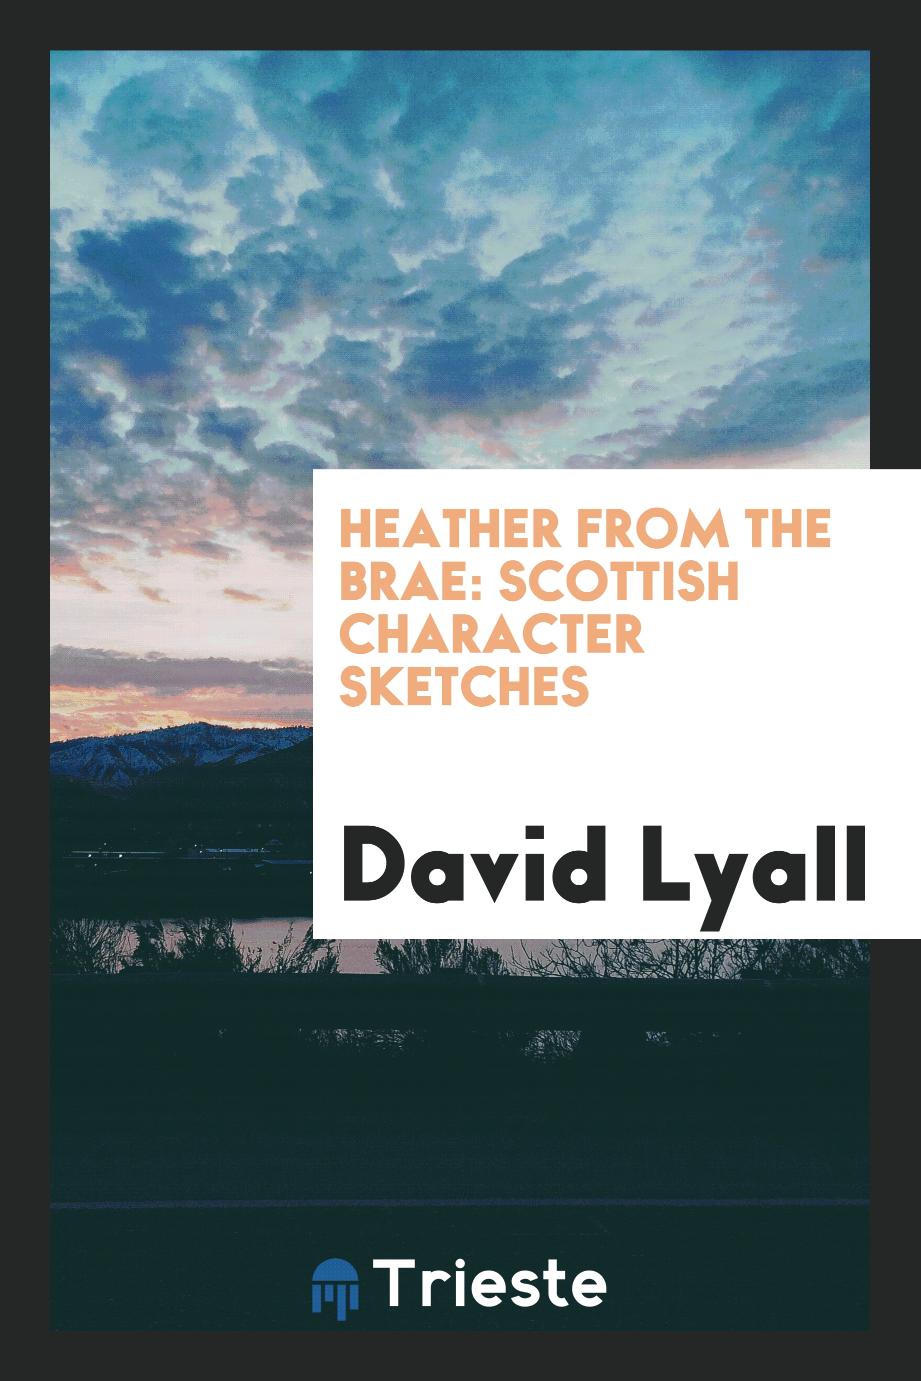 Heather from the Brae: Scottish Character Sketches